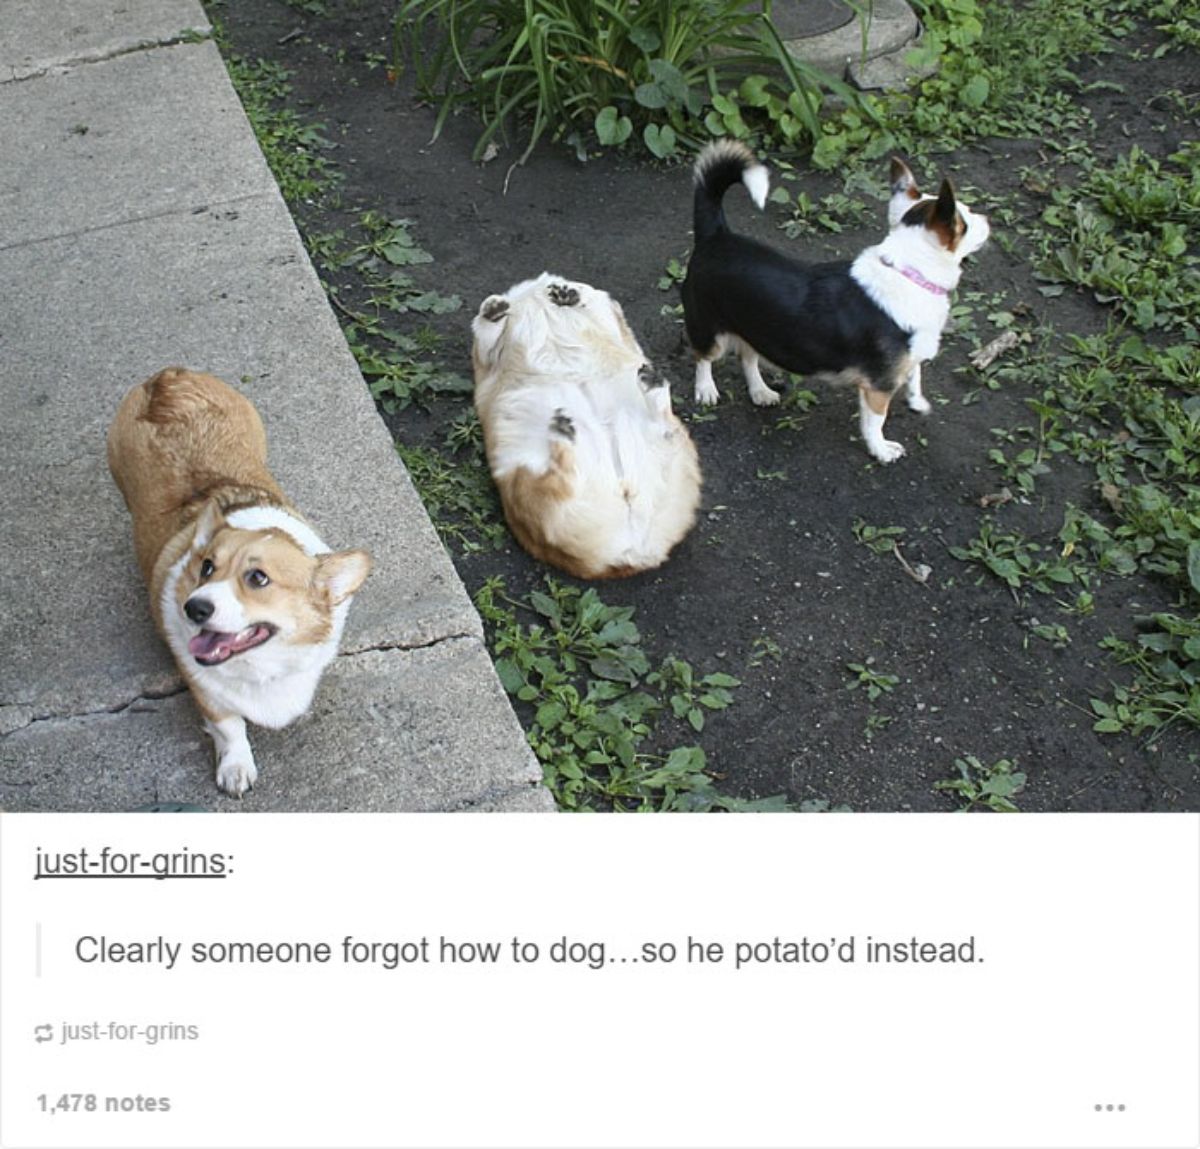 tumblr post of 2 brown and white corgis and black brown and white dog with one corgi in the middle upside down saying he forgot to dog and potato'd instead